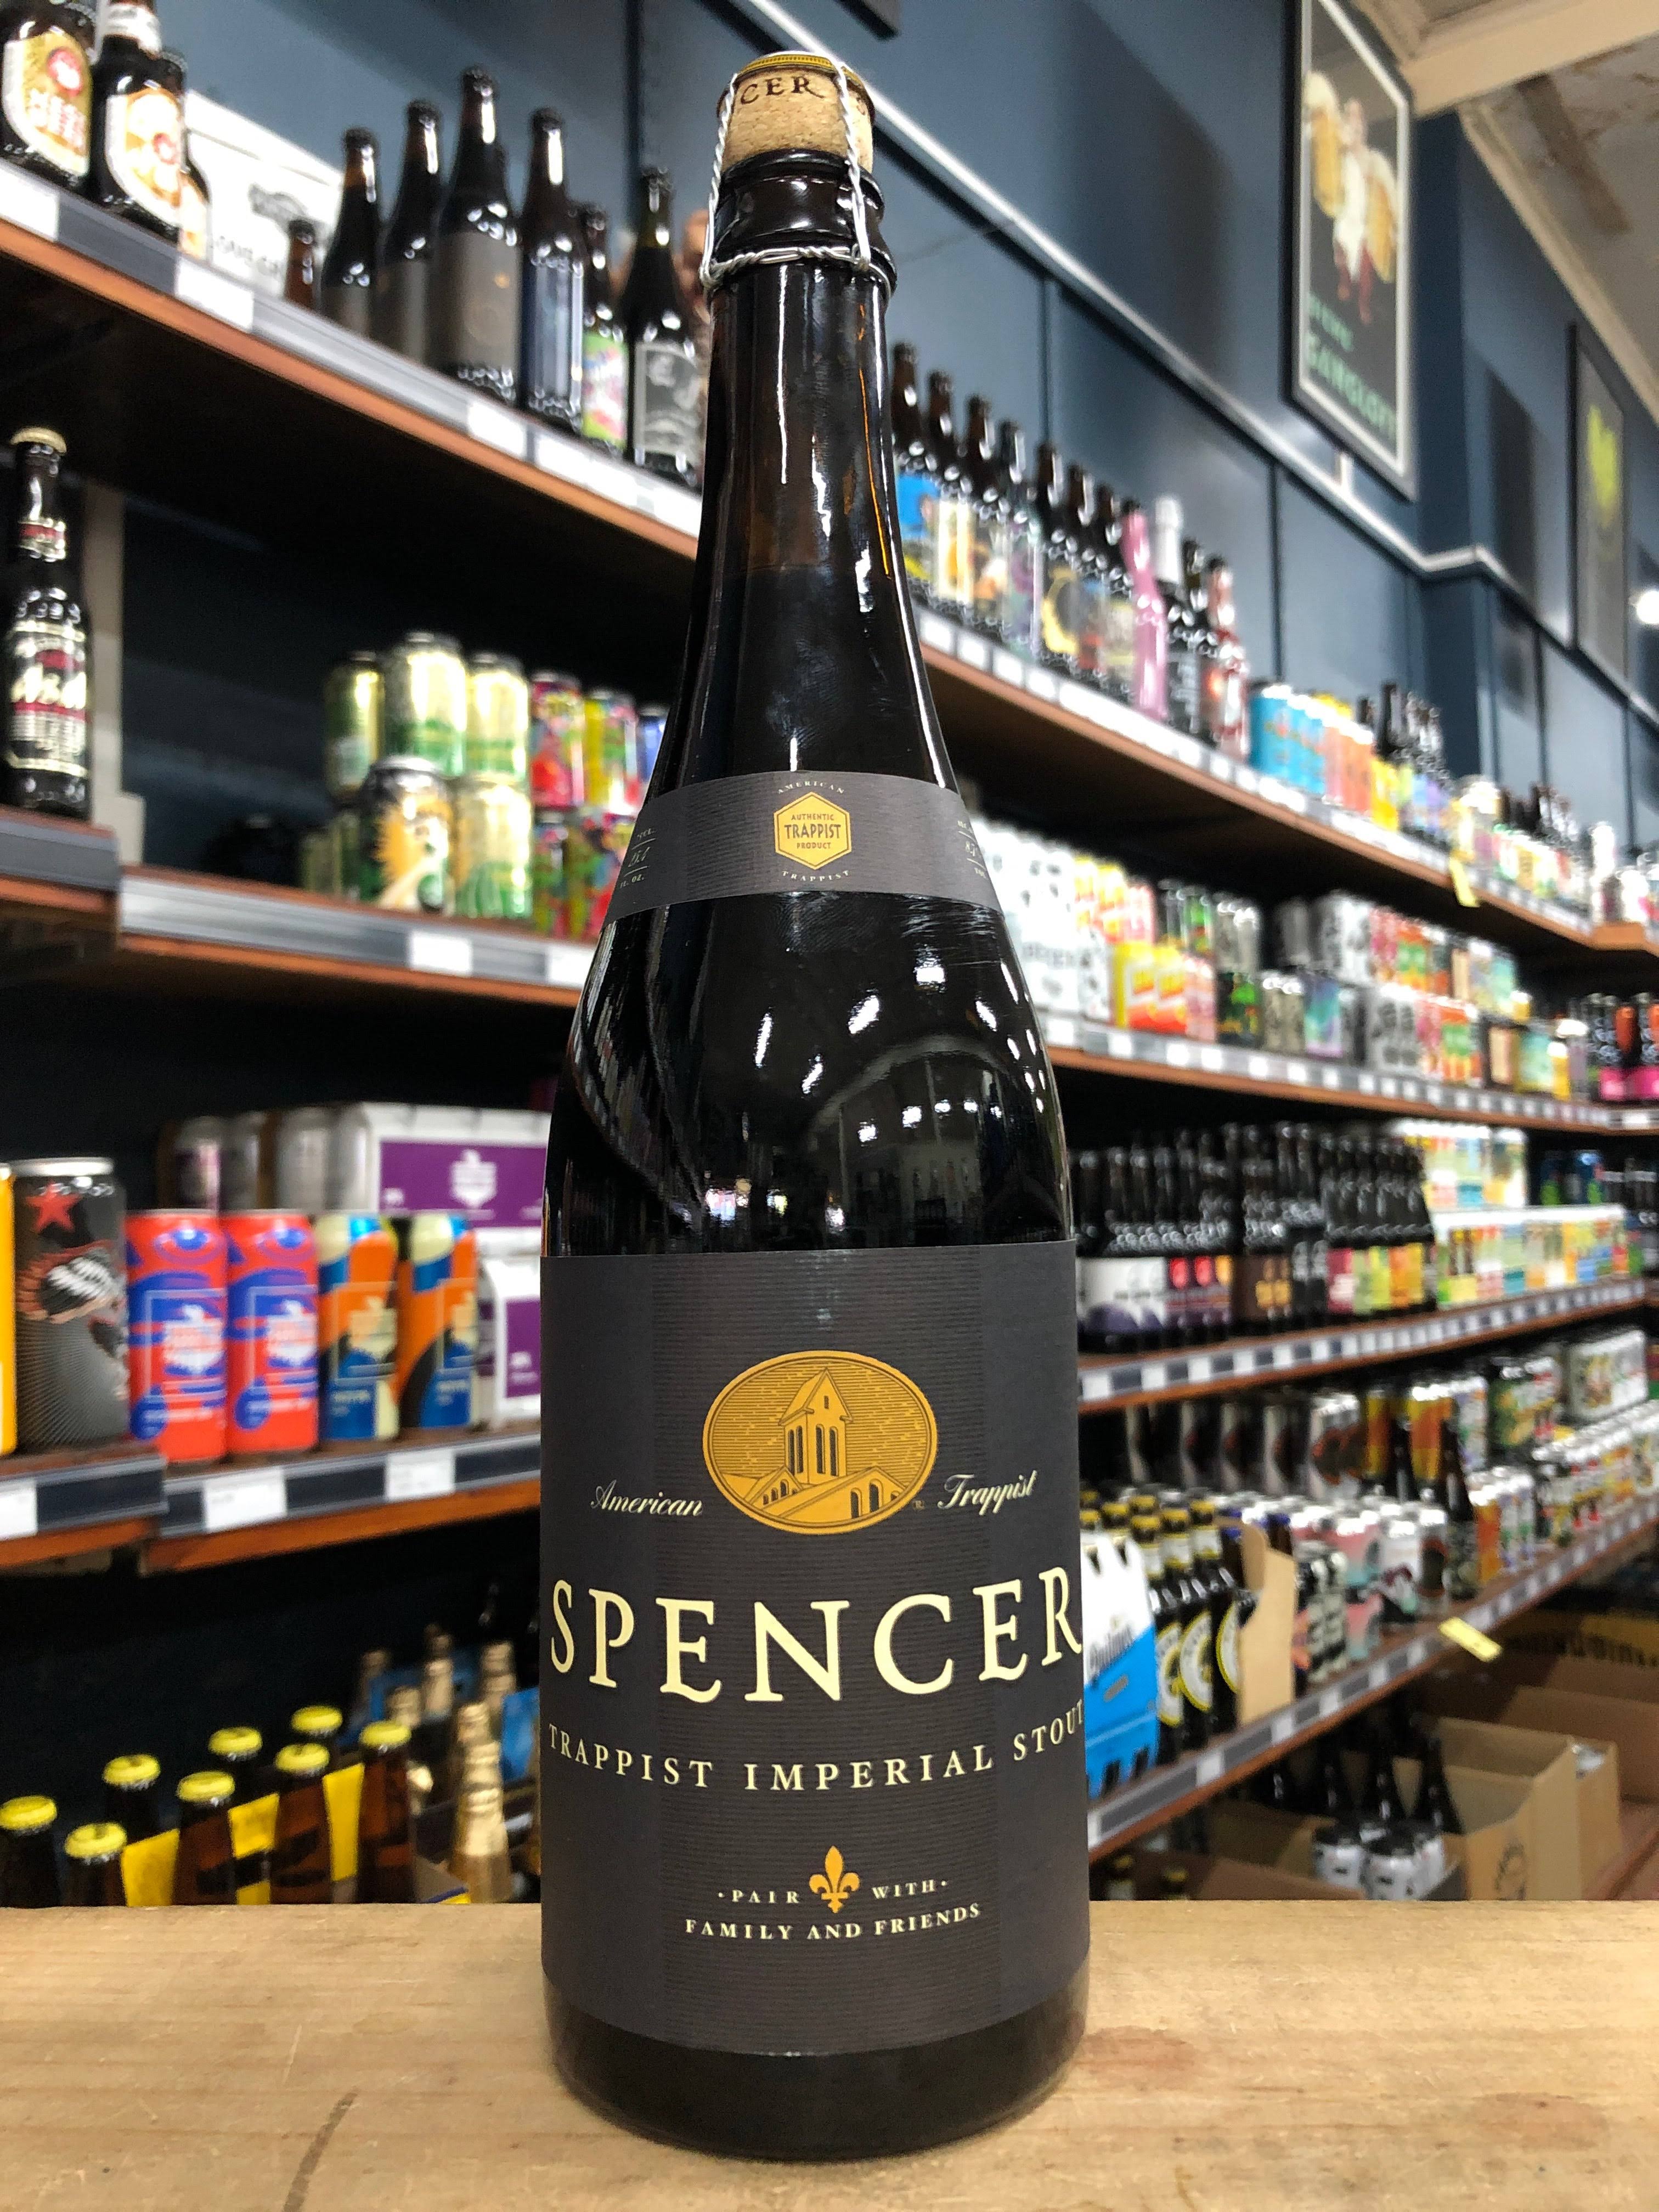 Spencer Trappist Imperial Stout - 75cl